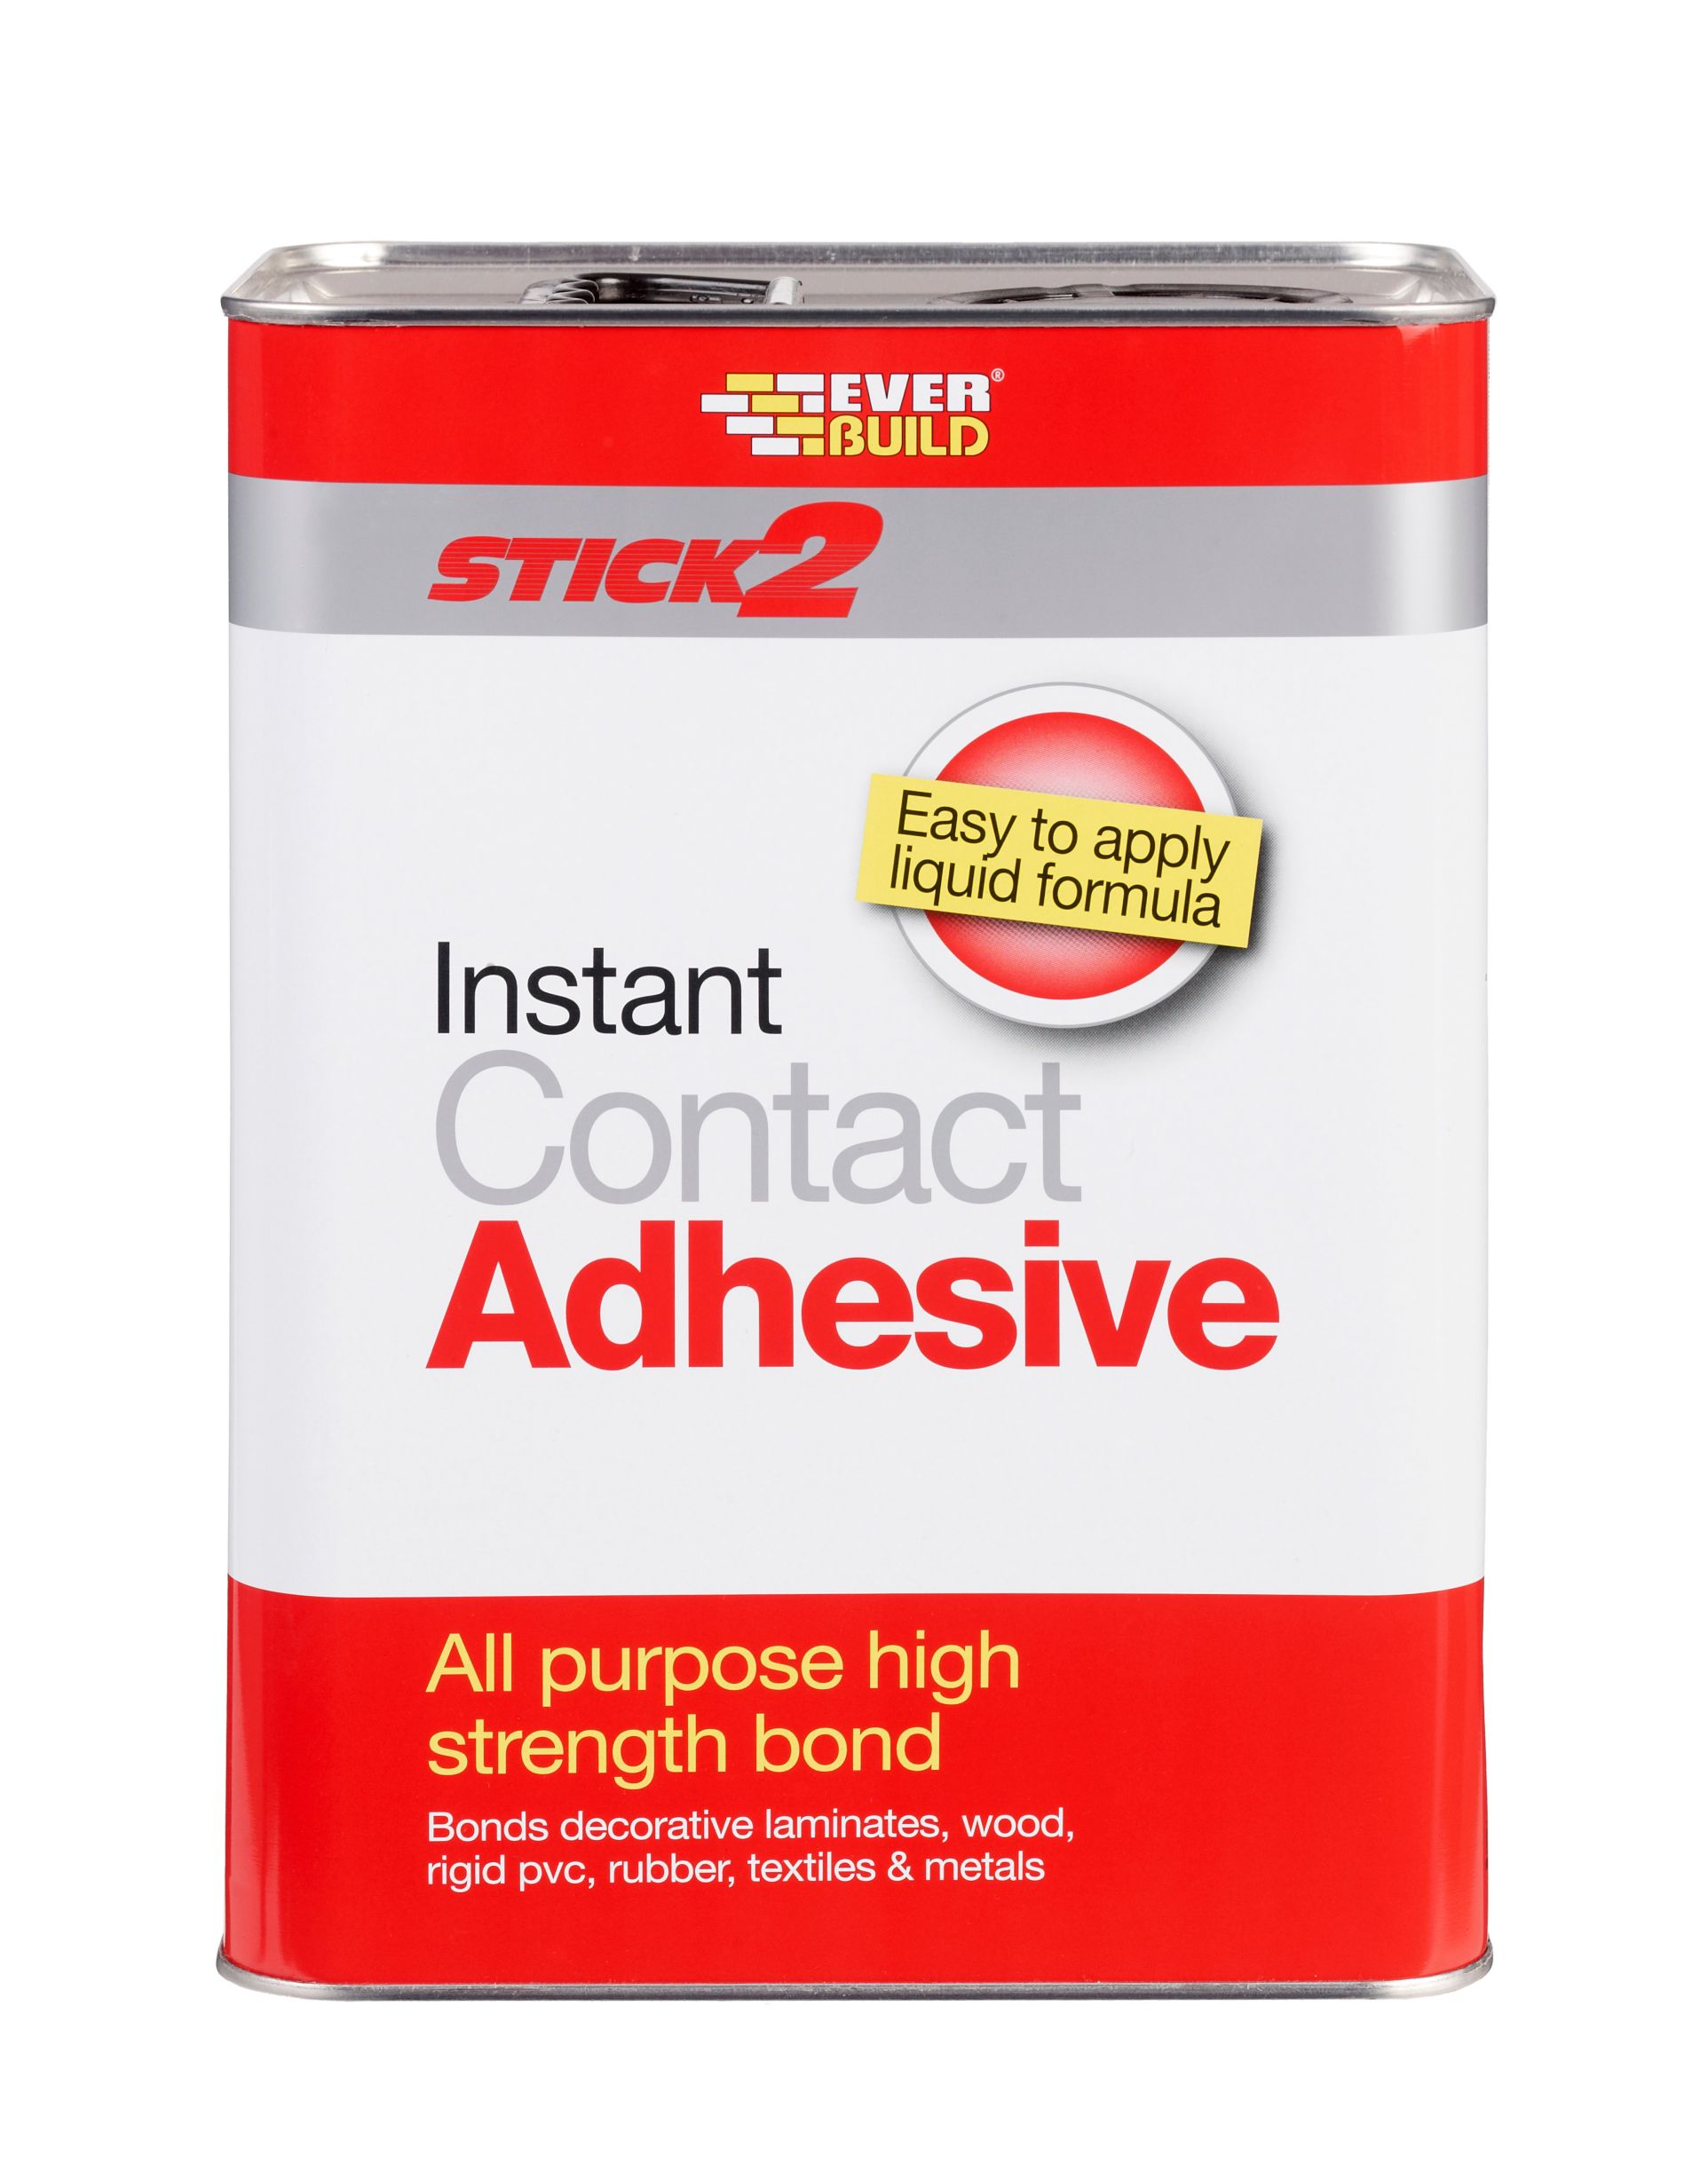 STICK2 ALL PURPOSE INSTANT CONTACT ADHESIVE 5L